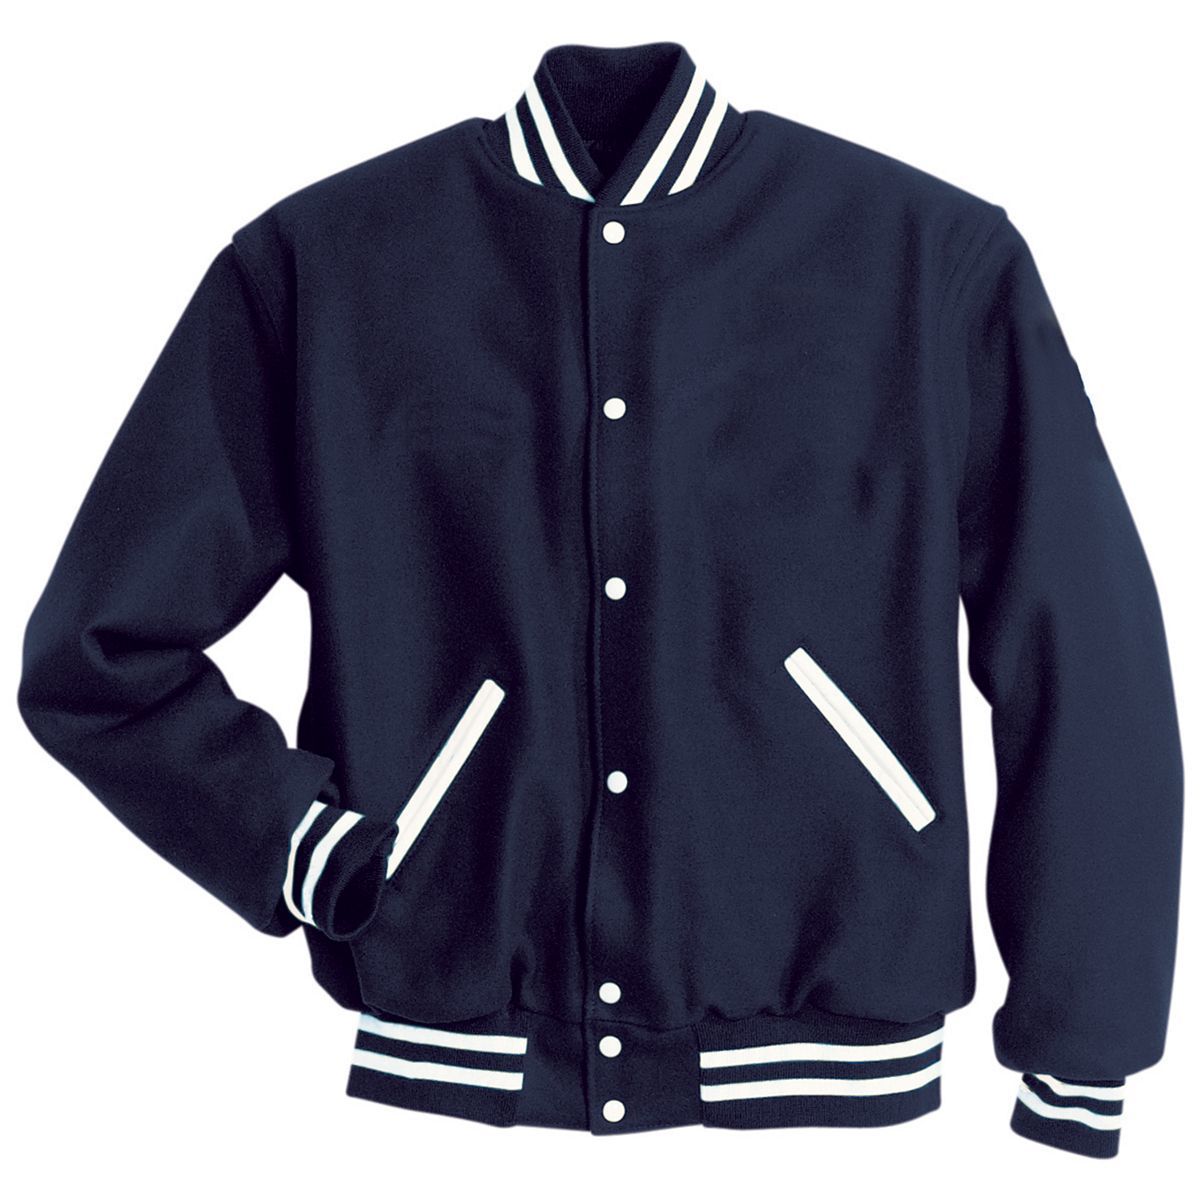 Holloway Letterman Jacket in Dark Navy/White  -Part of the Adult, Adult-Jacket, Holloway, Outerwear product lines at KanaleyCreations.com